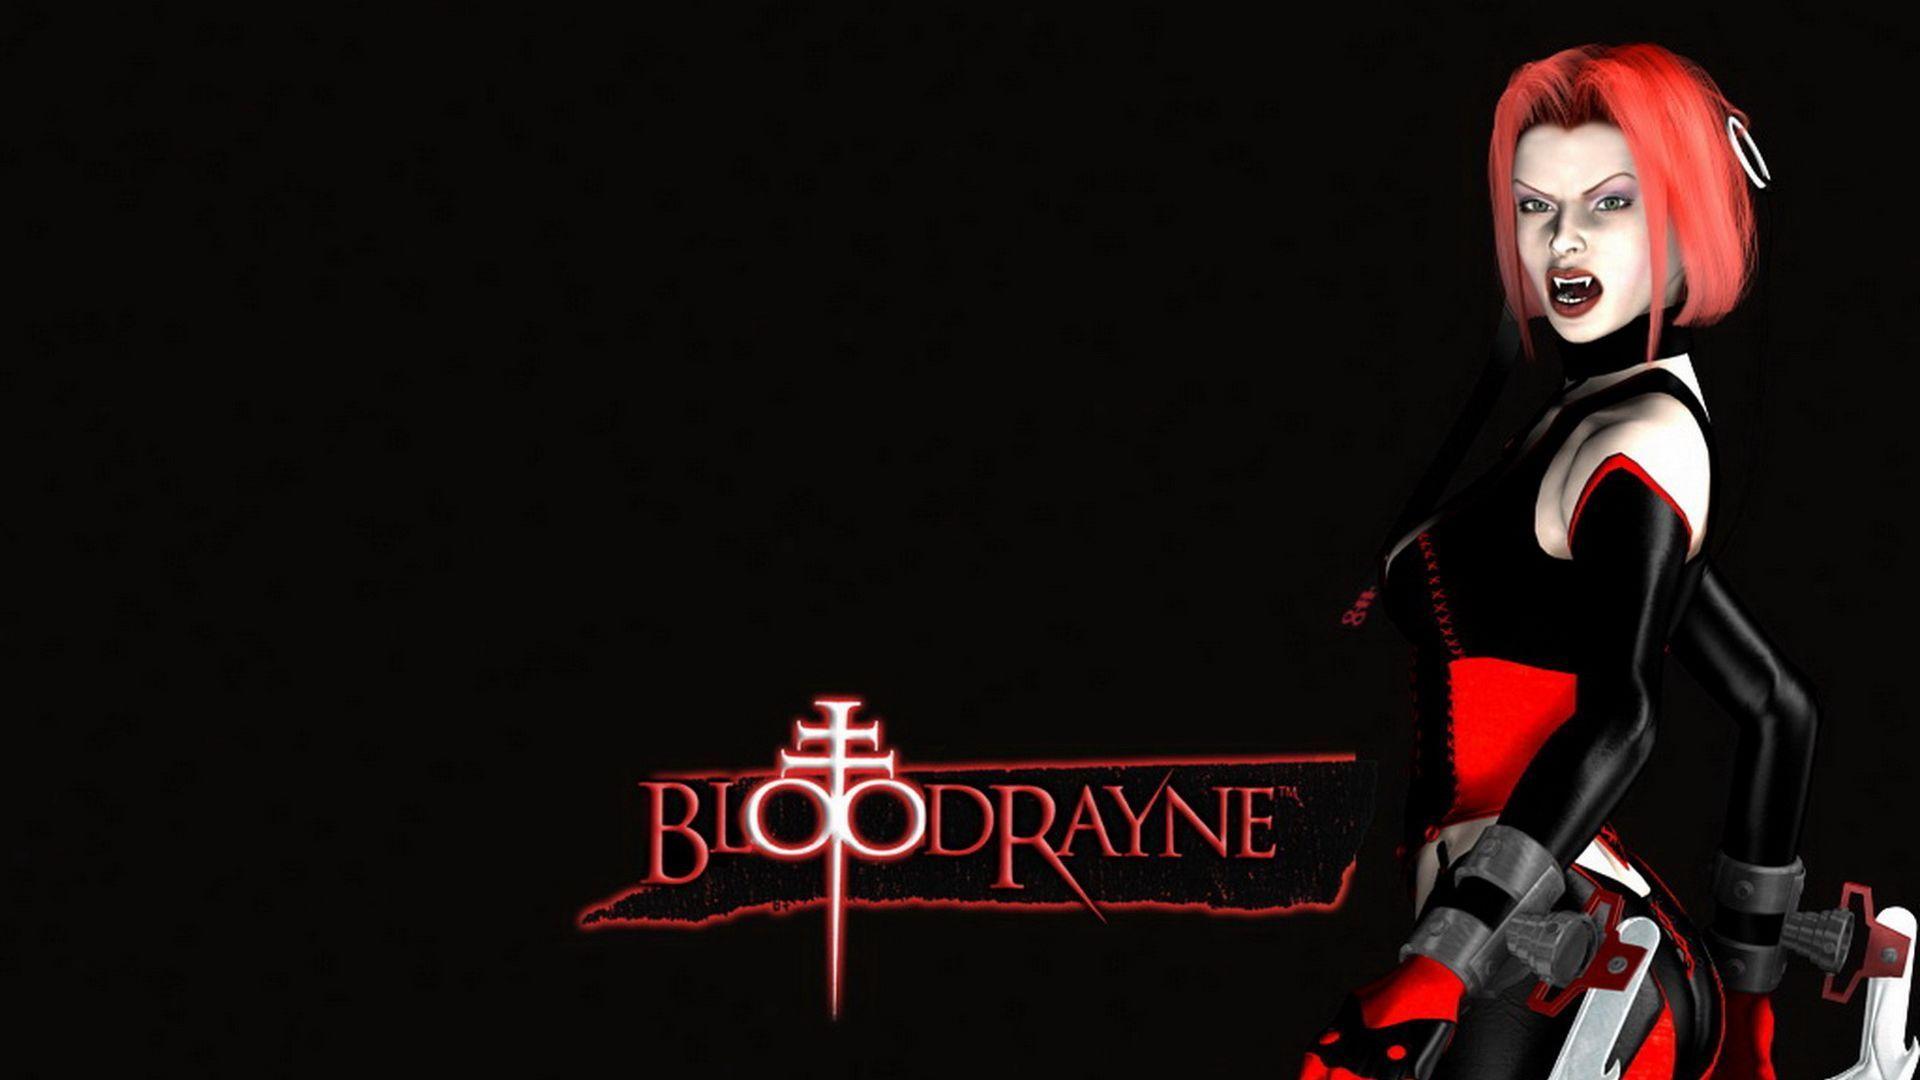 Download Bloodrayne wallpapers for mobile phone free Bloodrayne HD  pictures